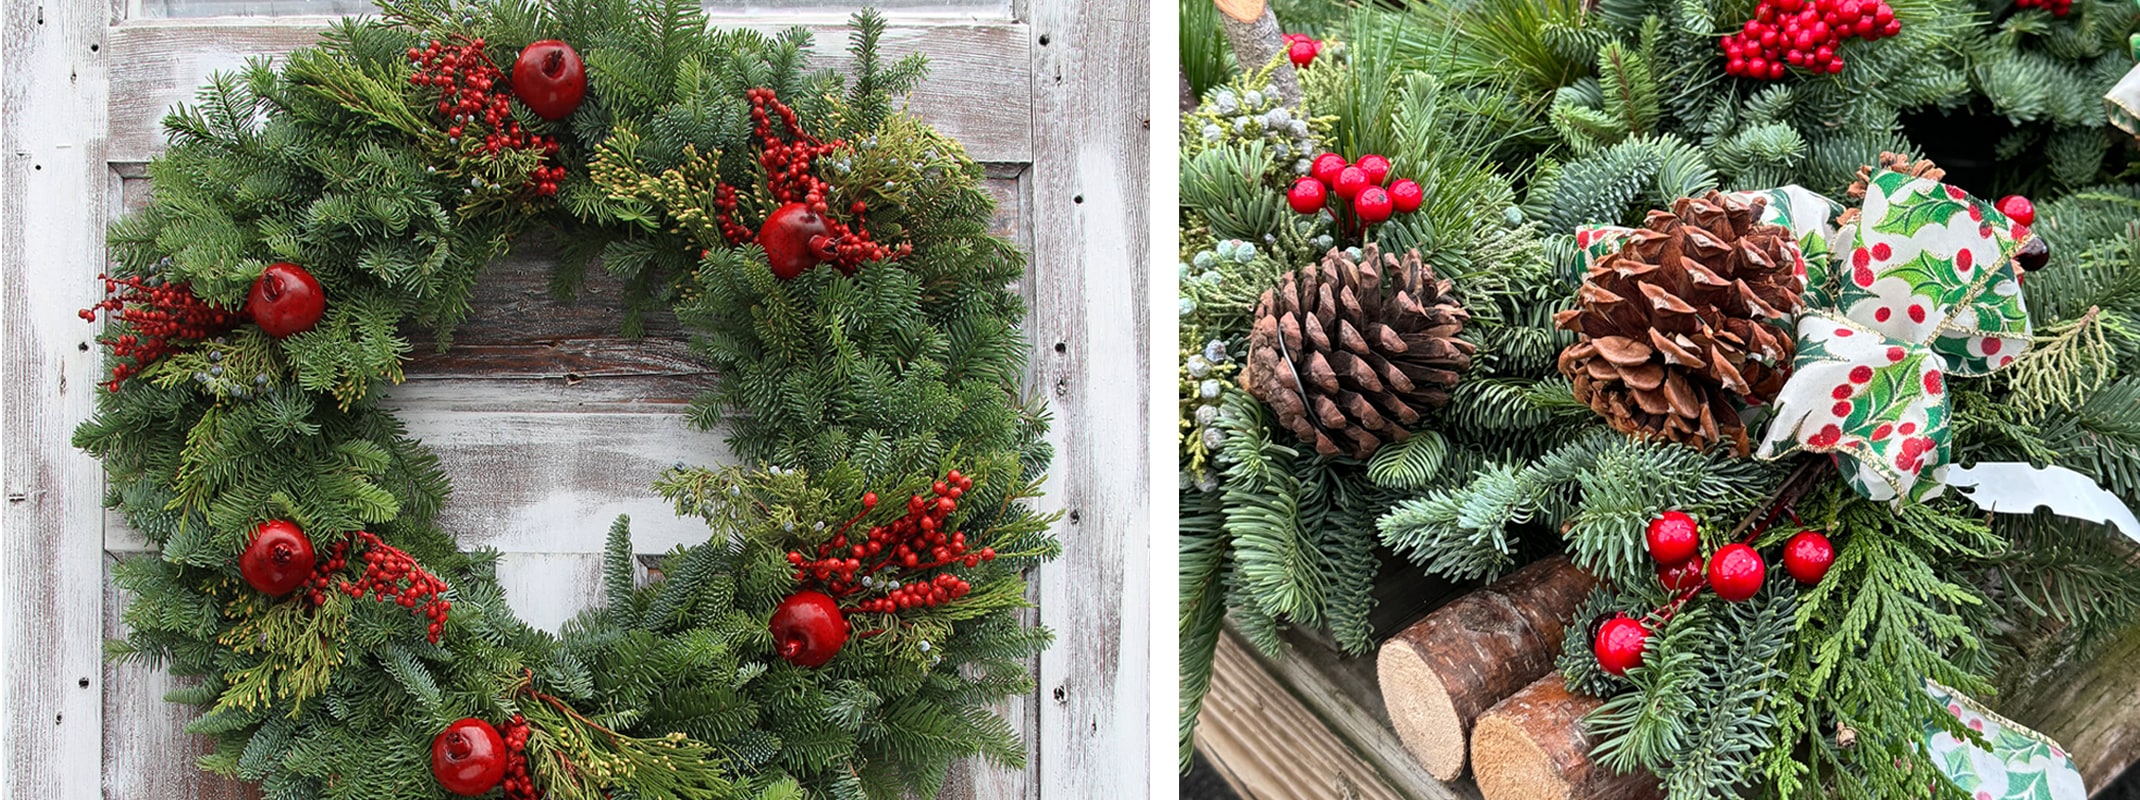 fernhill wreath and greenery on table with logs and pinecones